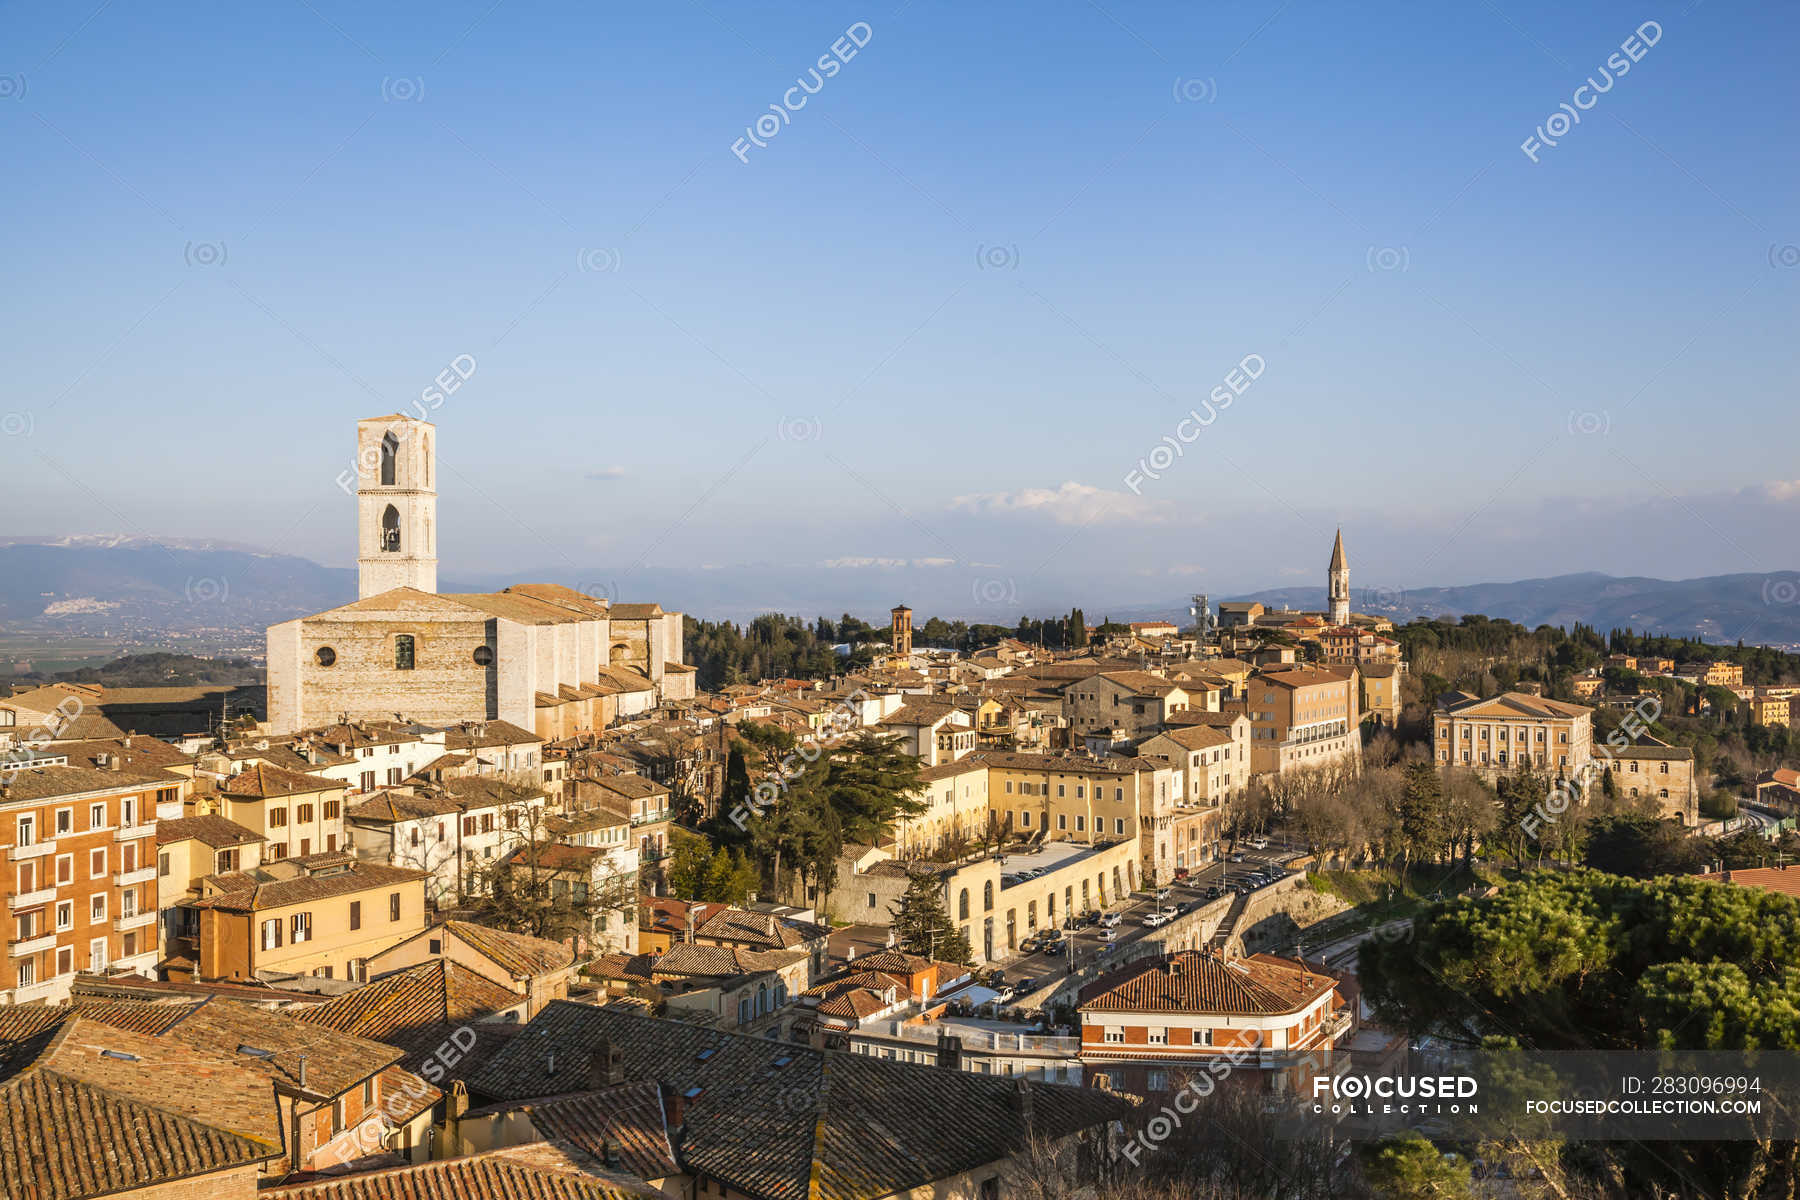 Italy Umbria Perugia View Of The City Valley And Its Surrounding Hills Rolling Landscapes Urban Stock Photo